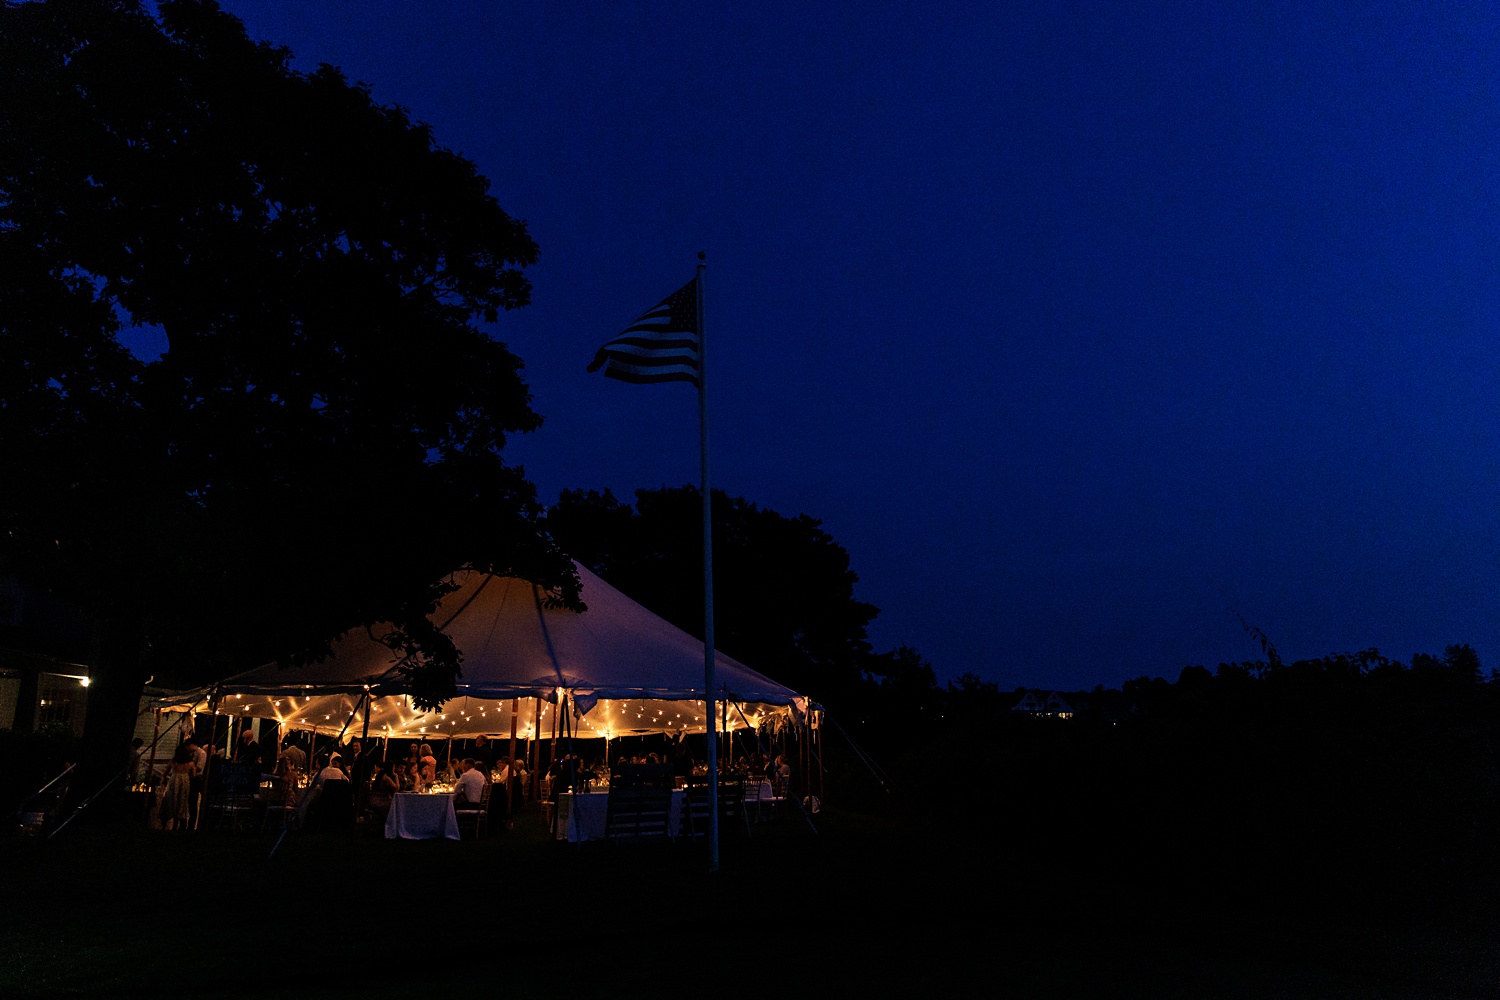 Prout's Neck Country Club lit up at night for the Maine wedding reception